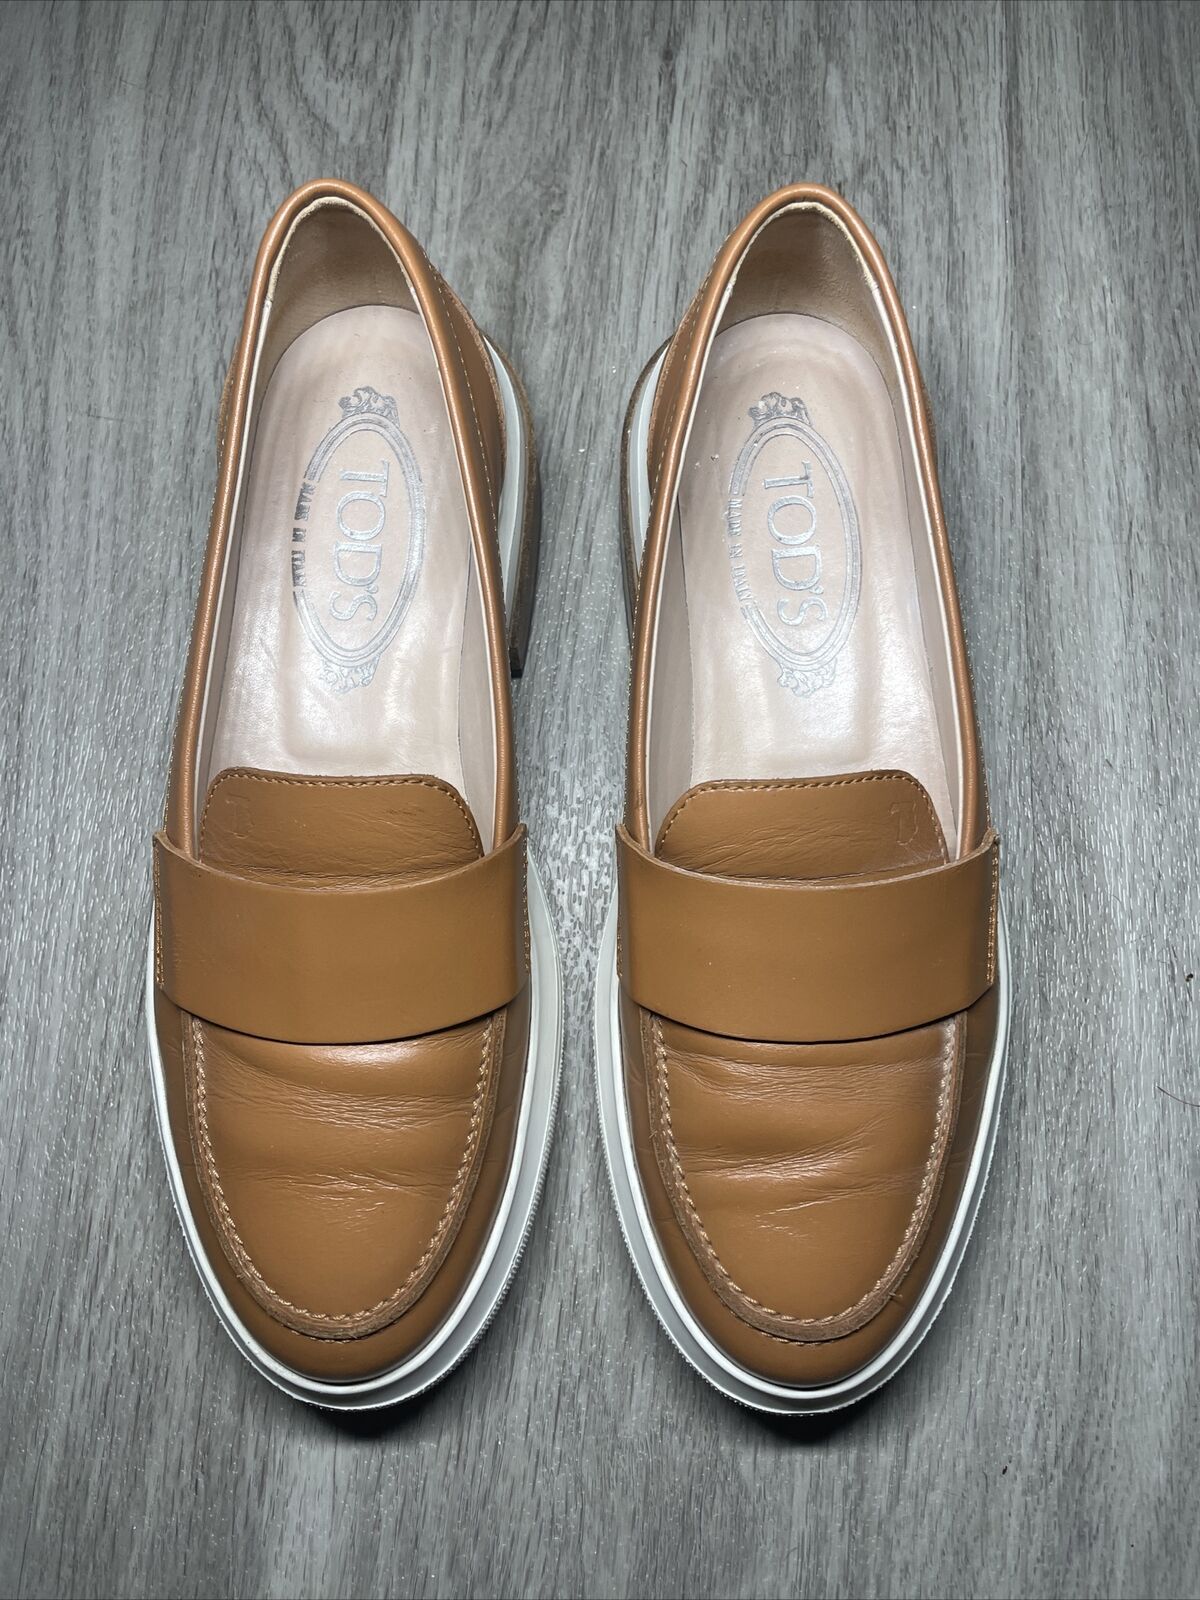 TOD’S Women Tan Leather Slip-On Loafers EURO 36/ US 5